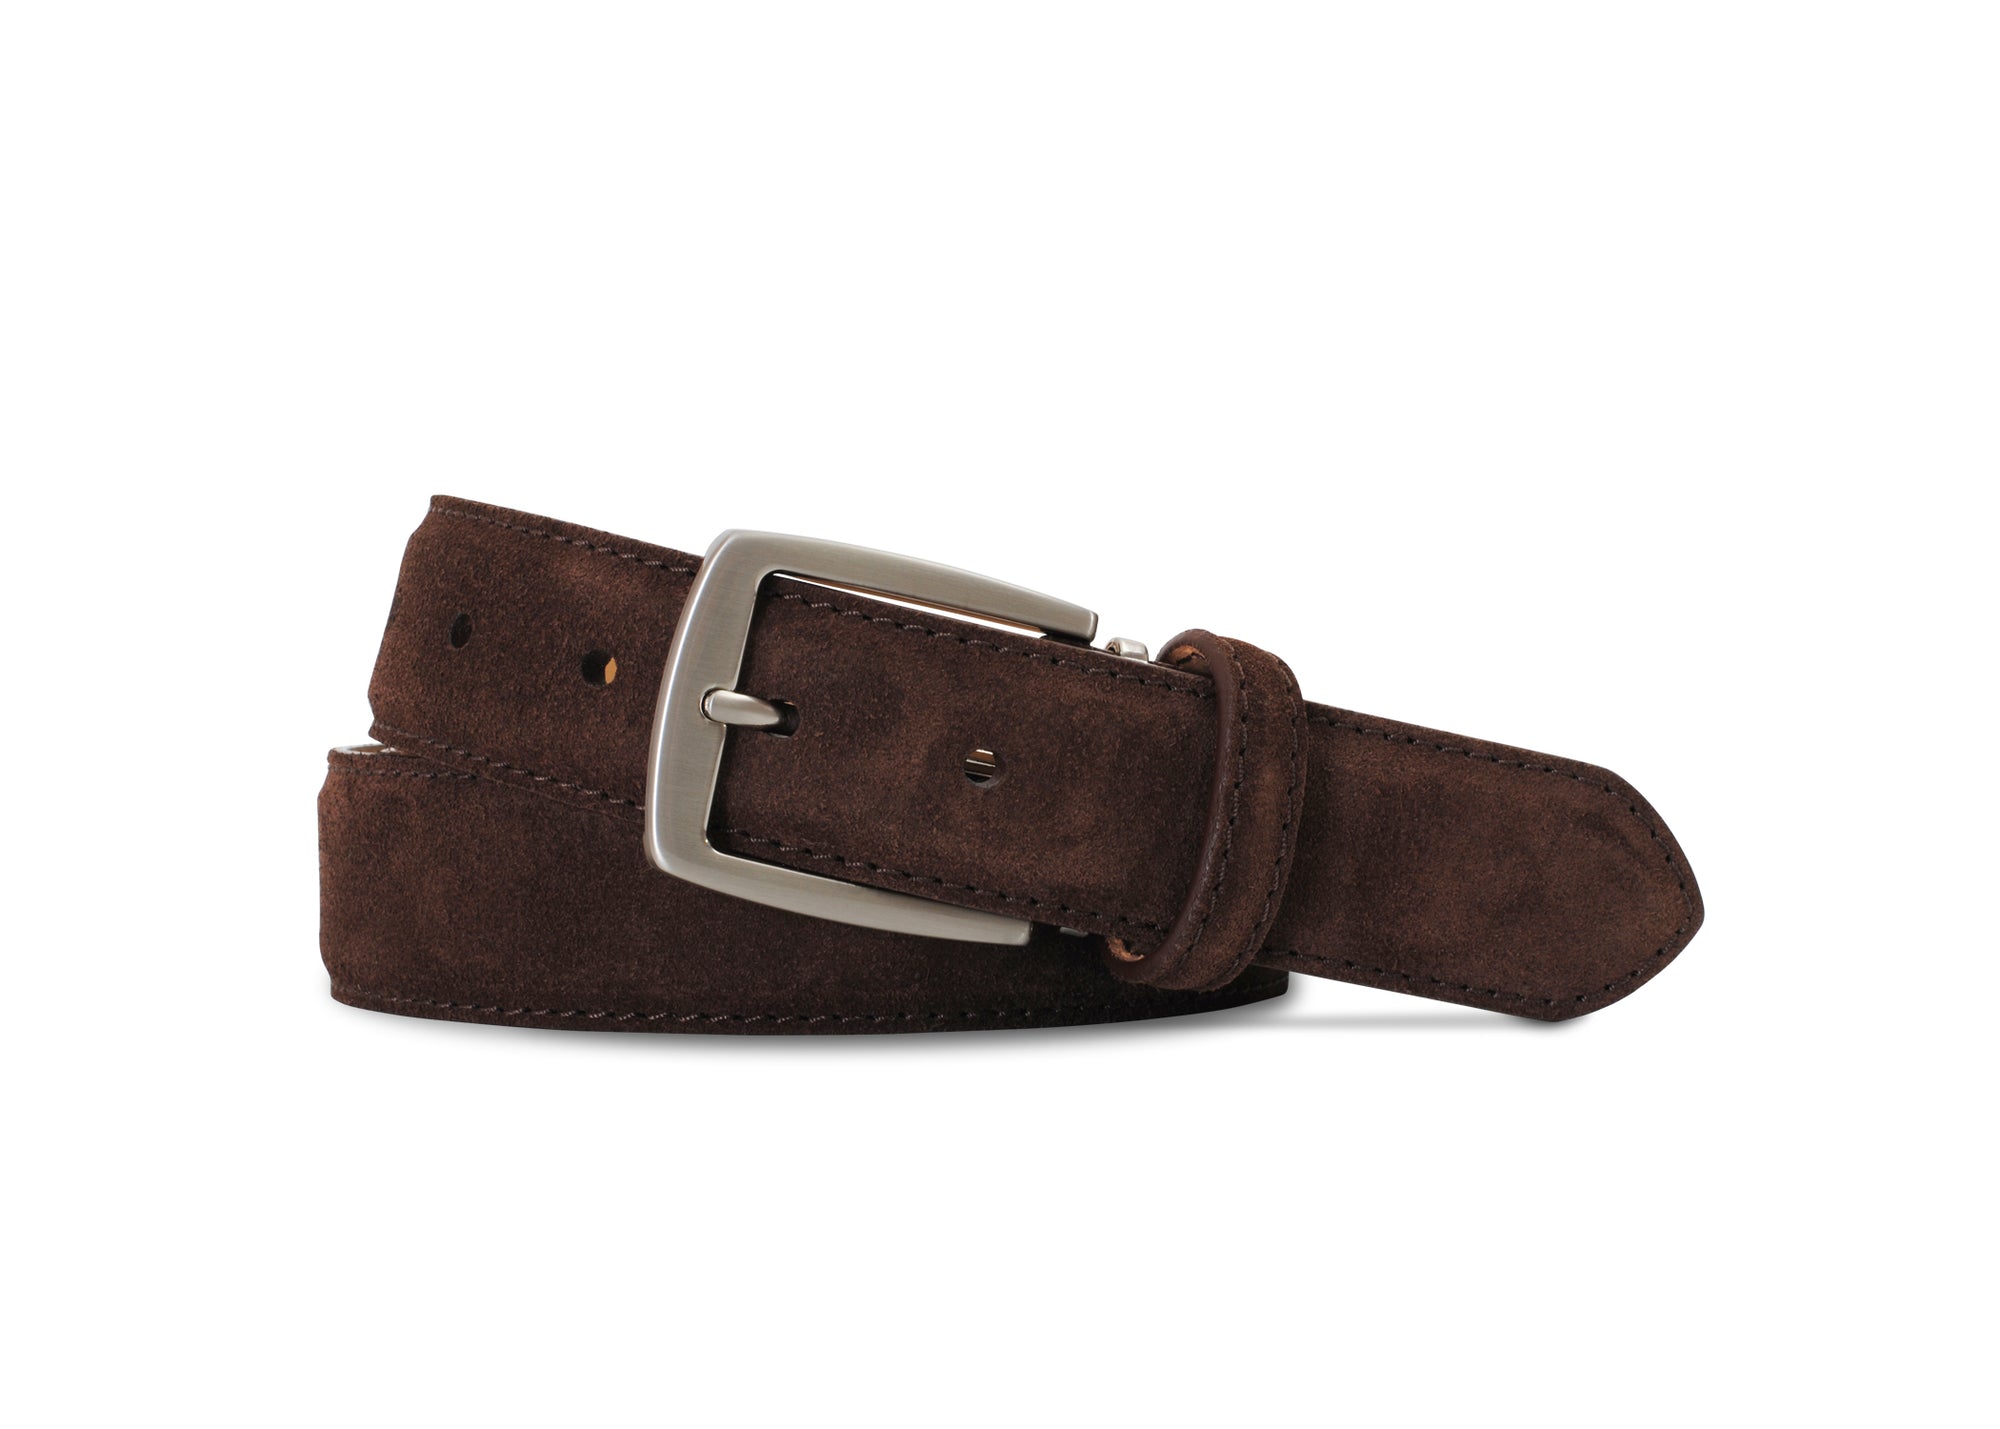 Italian Suede Belt in Chocolate by Brookes & Hyde